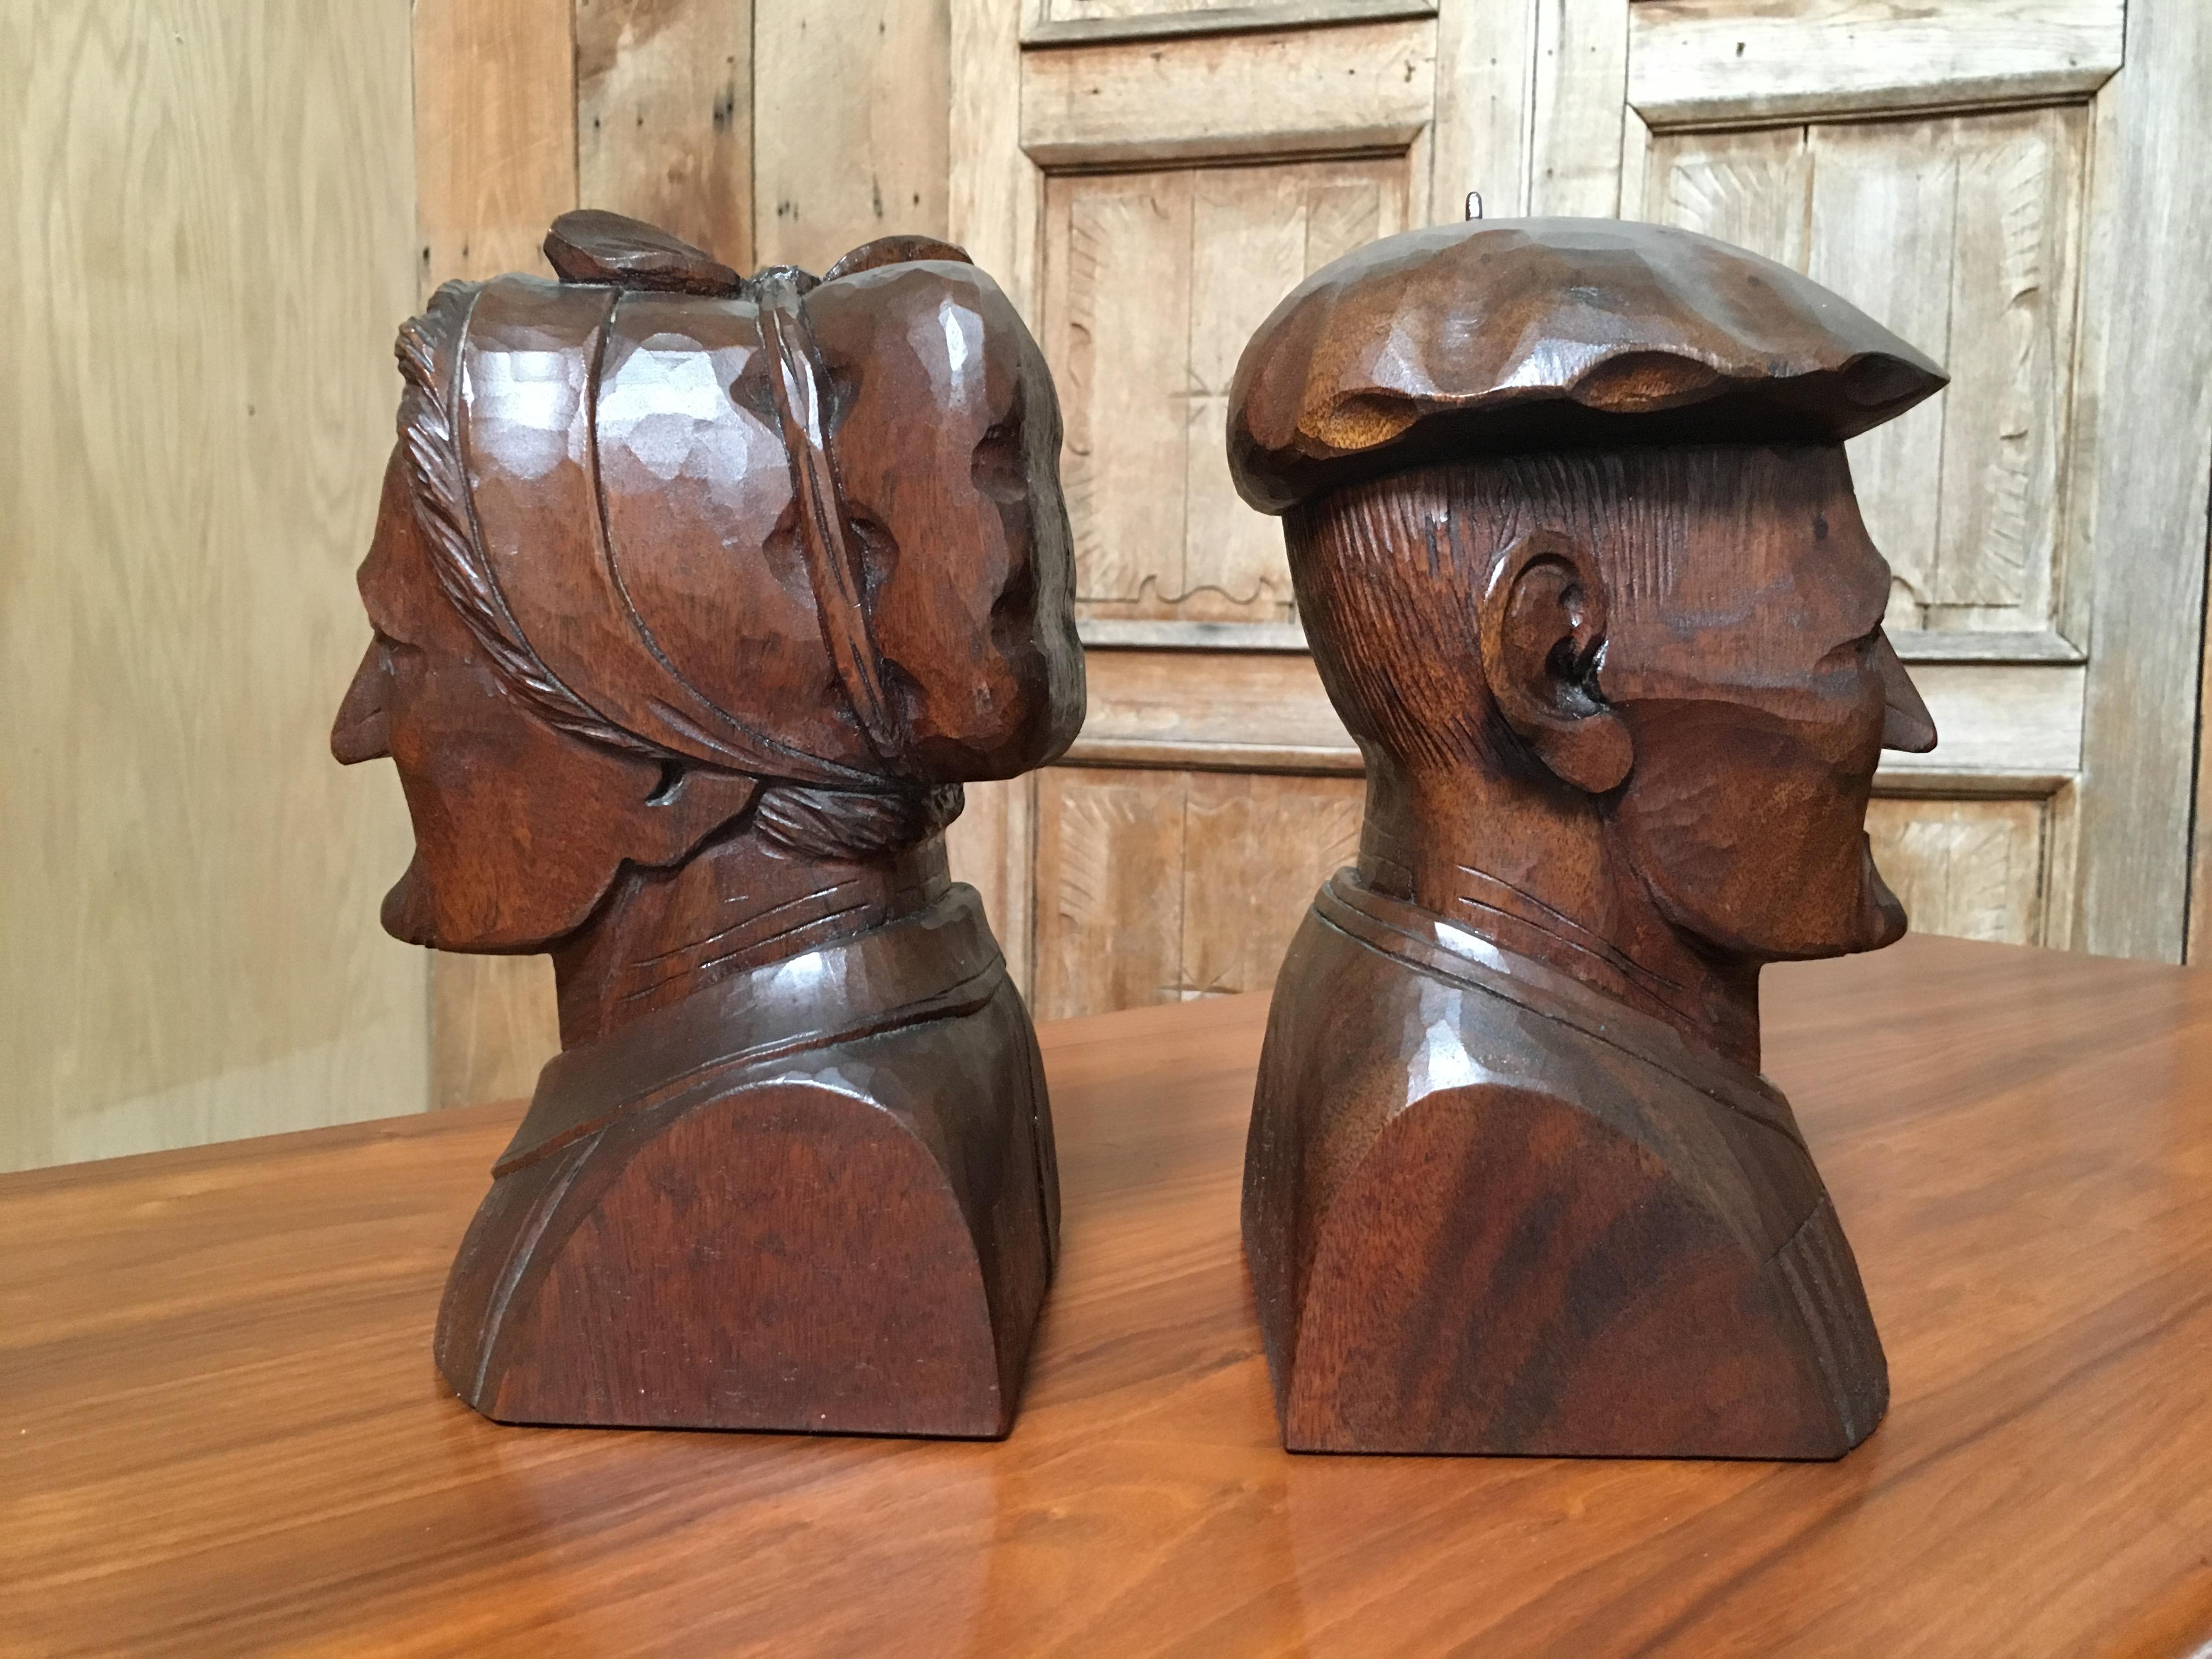 Solid hardwood carved antique sculptures of a French man and woman can be used as bookends or on their own.